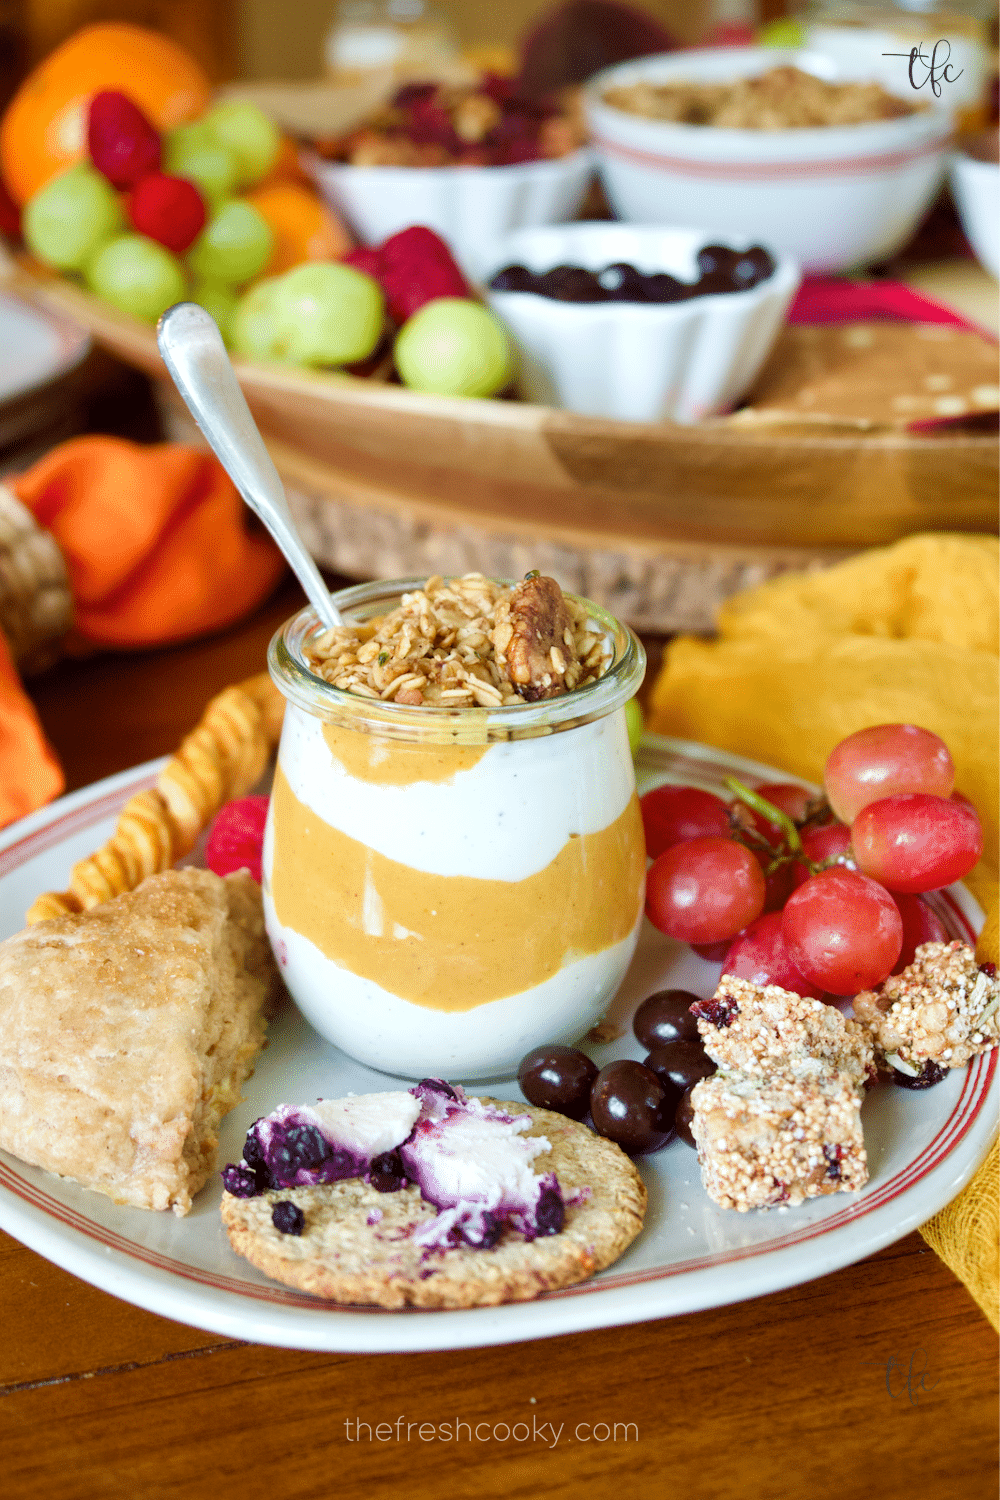 A plate filled with delicious pumpkin yogurt, cinnamon scones, cheese and crackers, grapes and other nibbles from the fall charcuterie breakfast board.